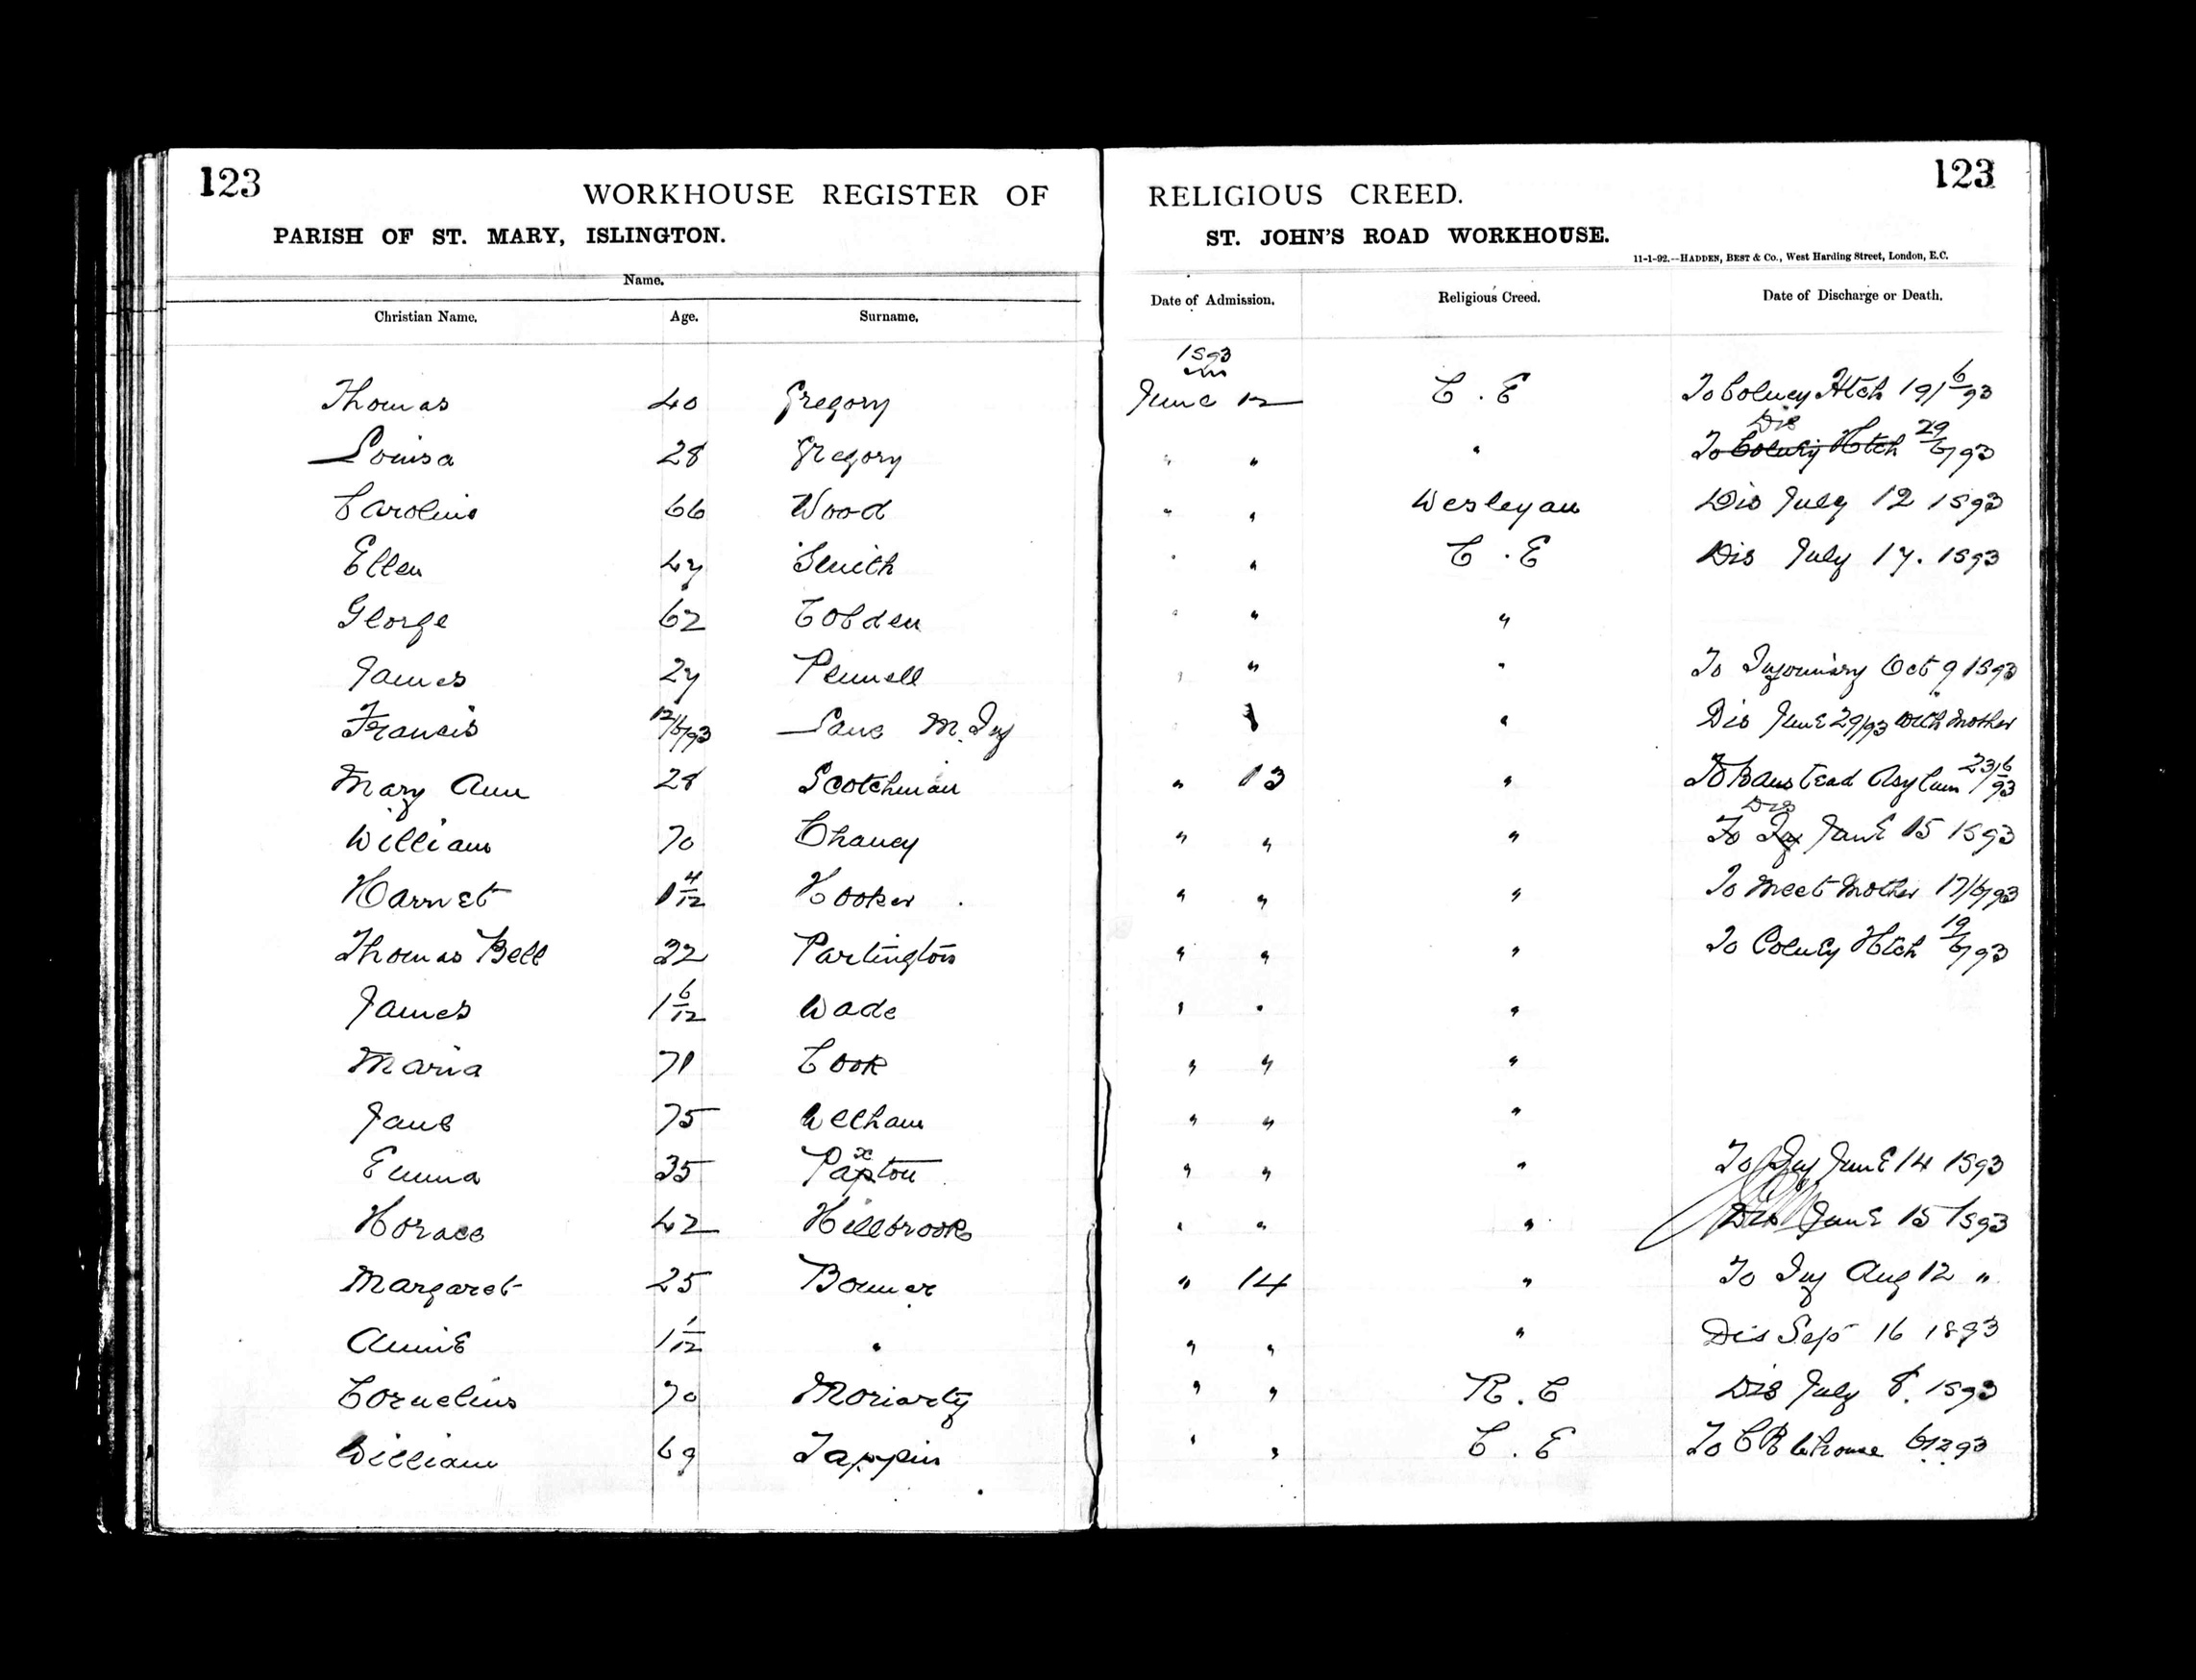 William Tappin at the age of 69 in the Workhouse Register